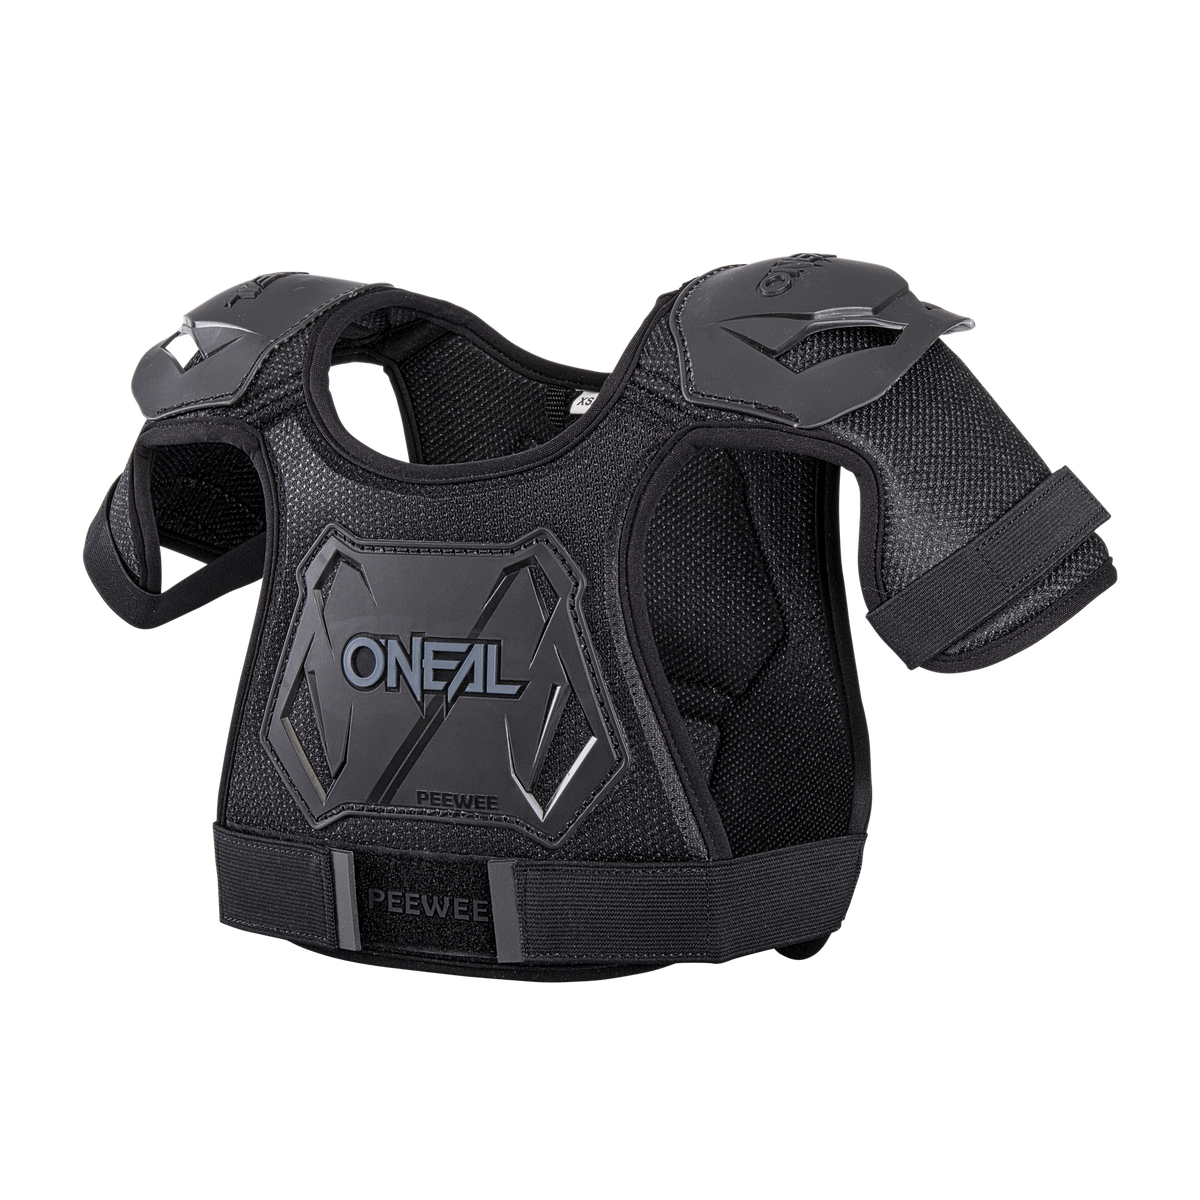 https://cdn.oneal.eu/assets/importedProductImages/PROTECTION/YOUTH/BODY%20ARMOUR/PEEWEE%20CHEST%20GUARD/black/2017_ONeal_PEEWEE_Chest_Guard_black.png